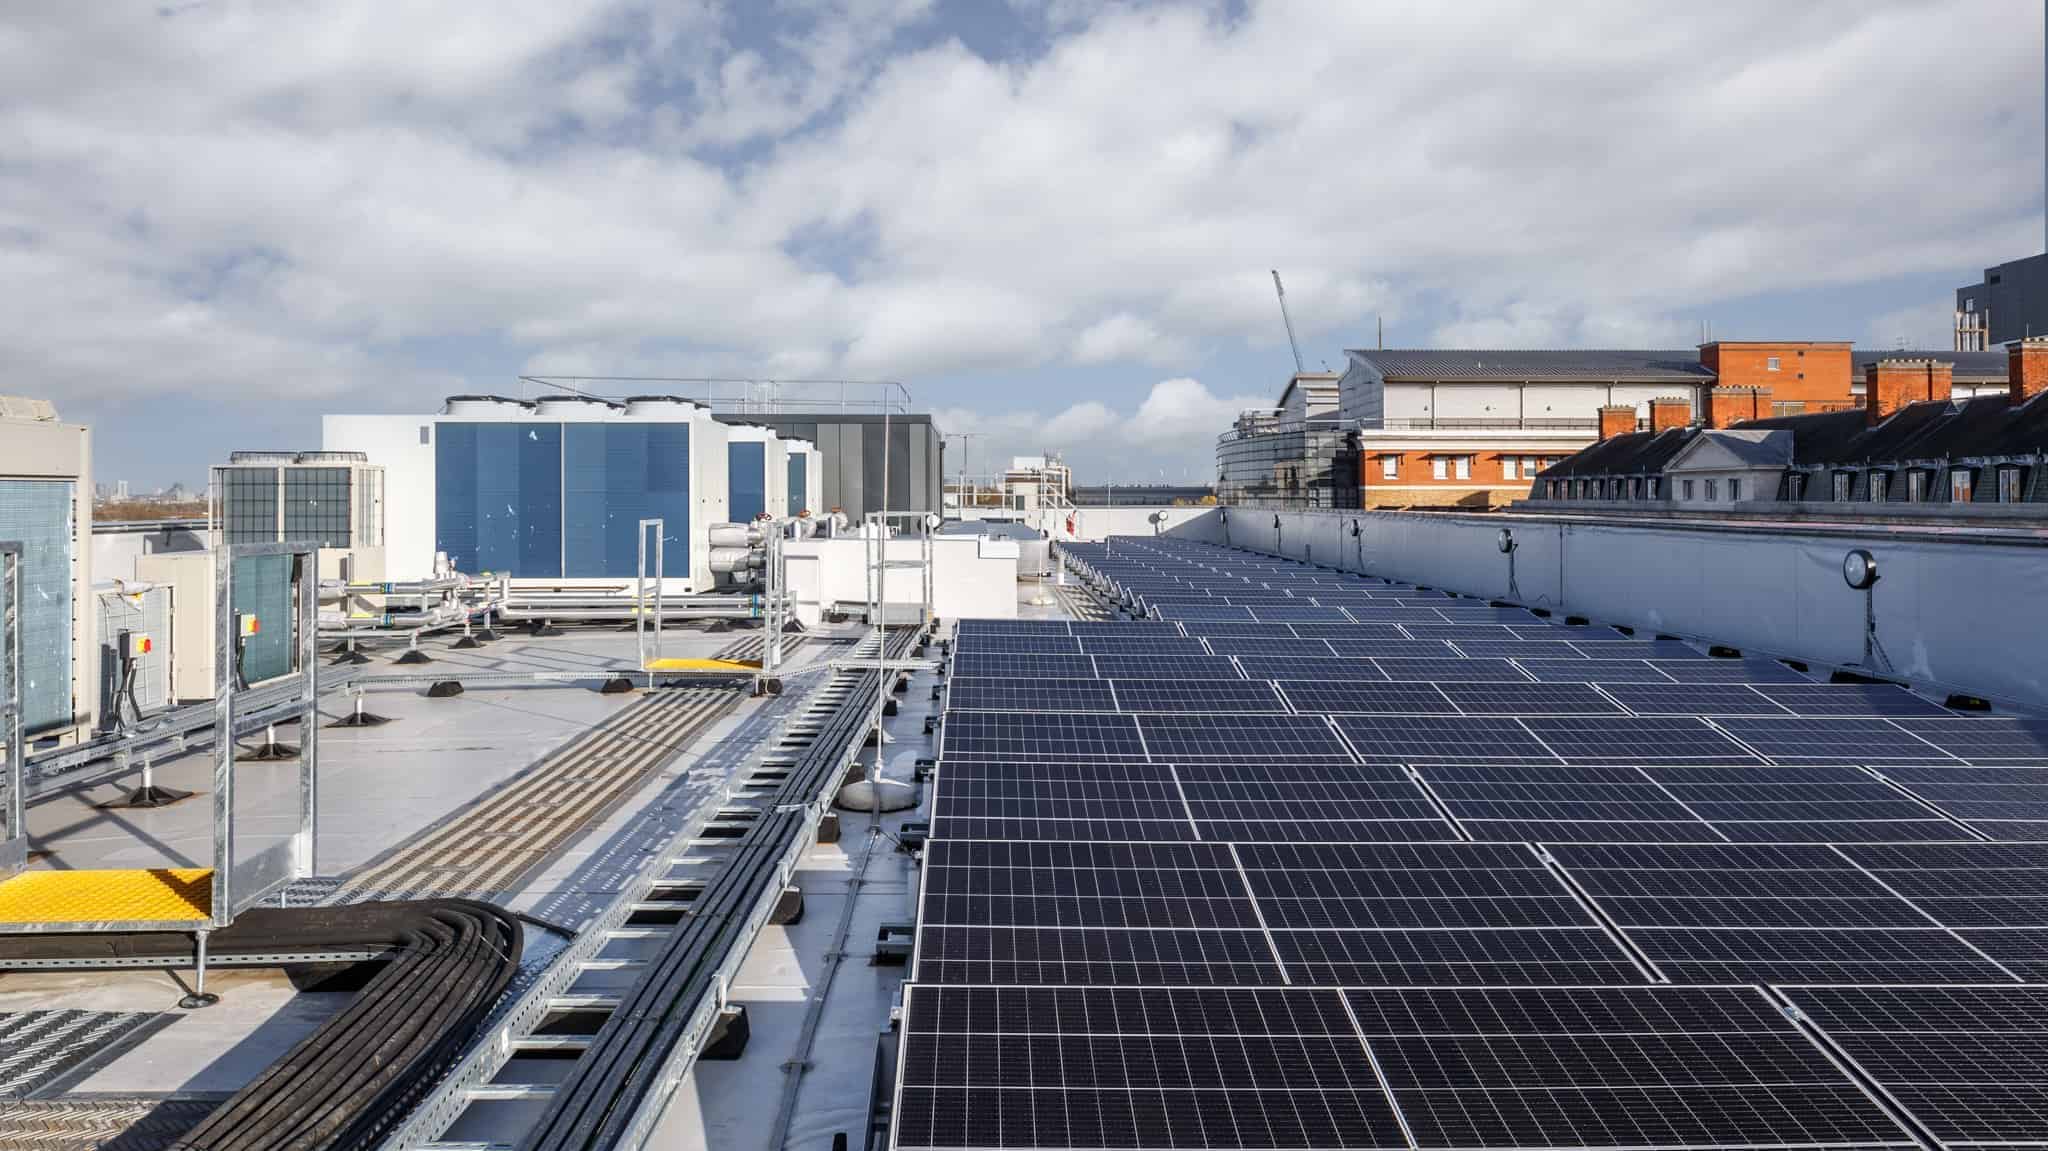 On the roof of a modular building, solar panels lay across, providing a more energy efficient solution.